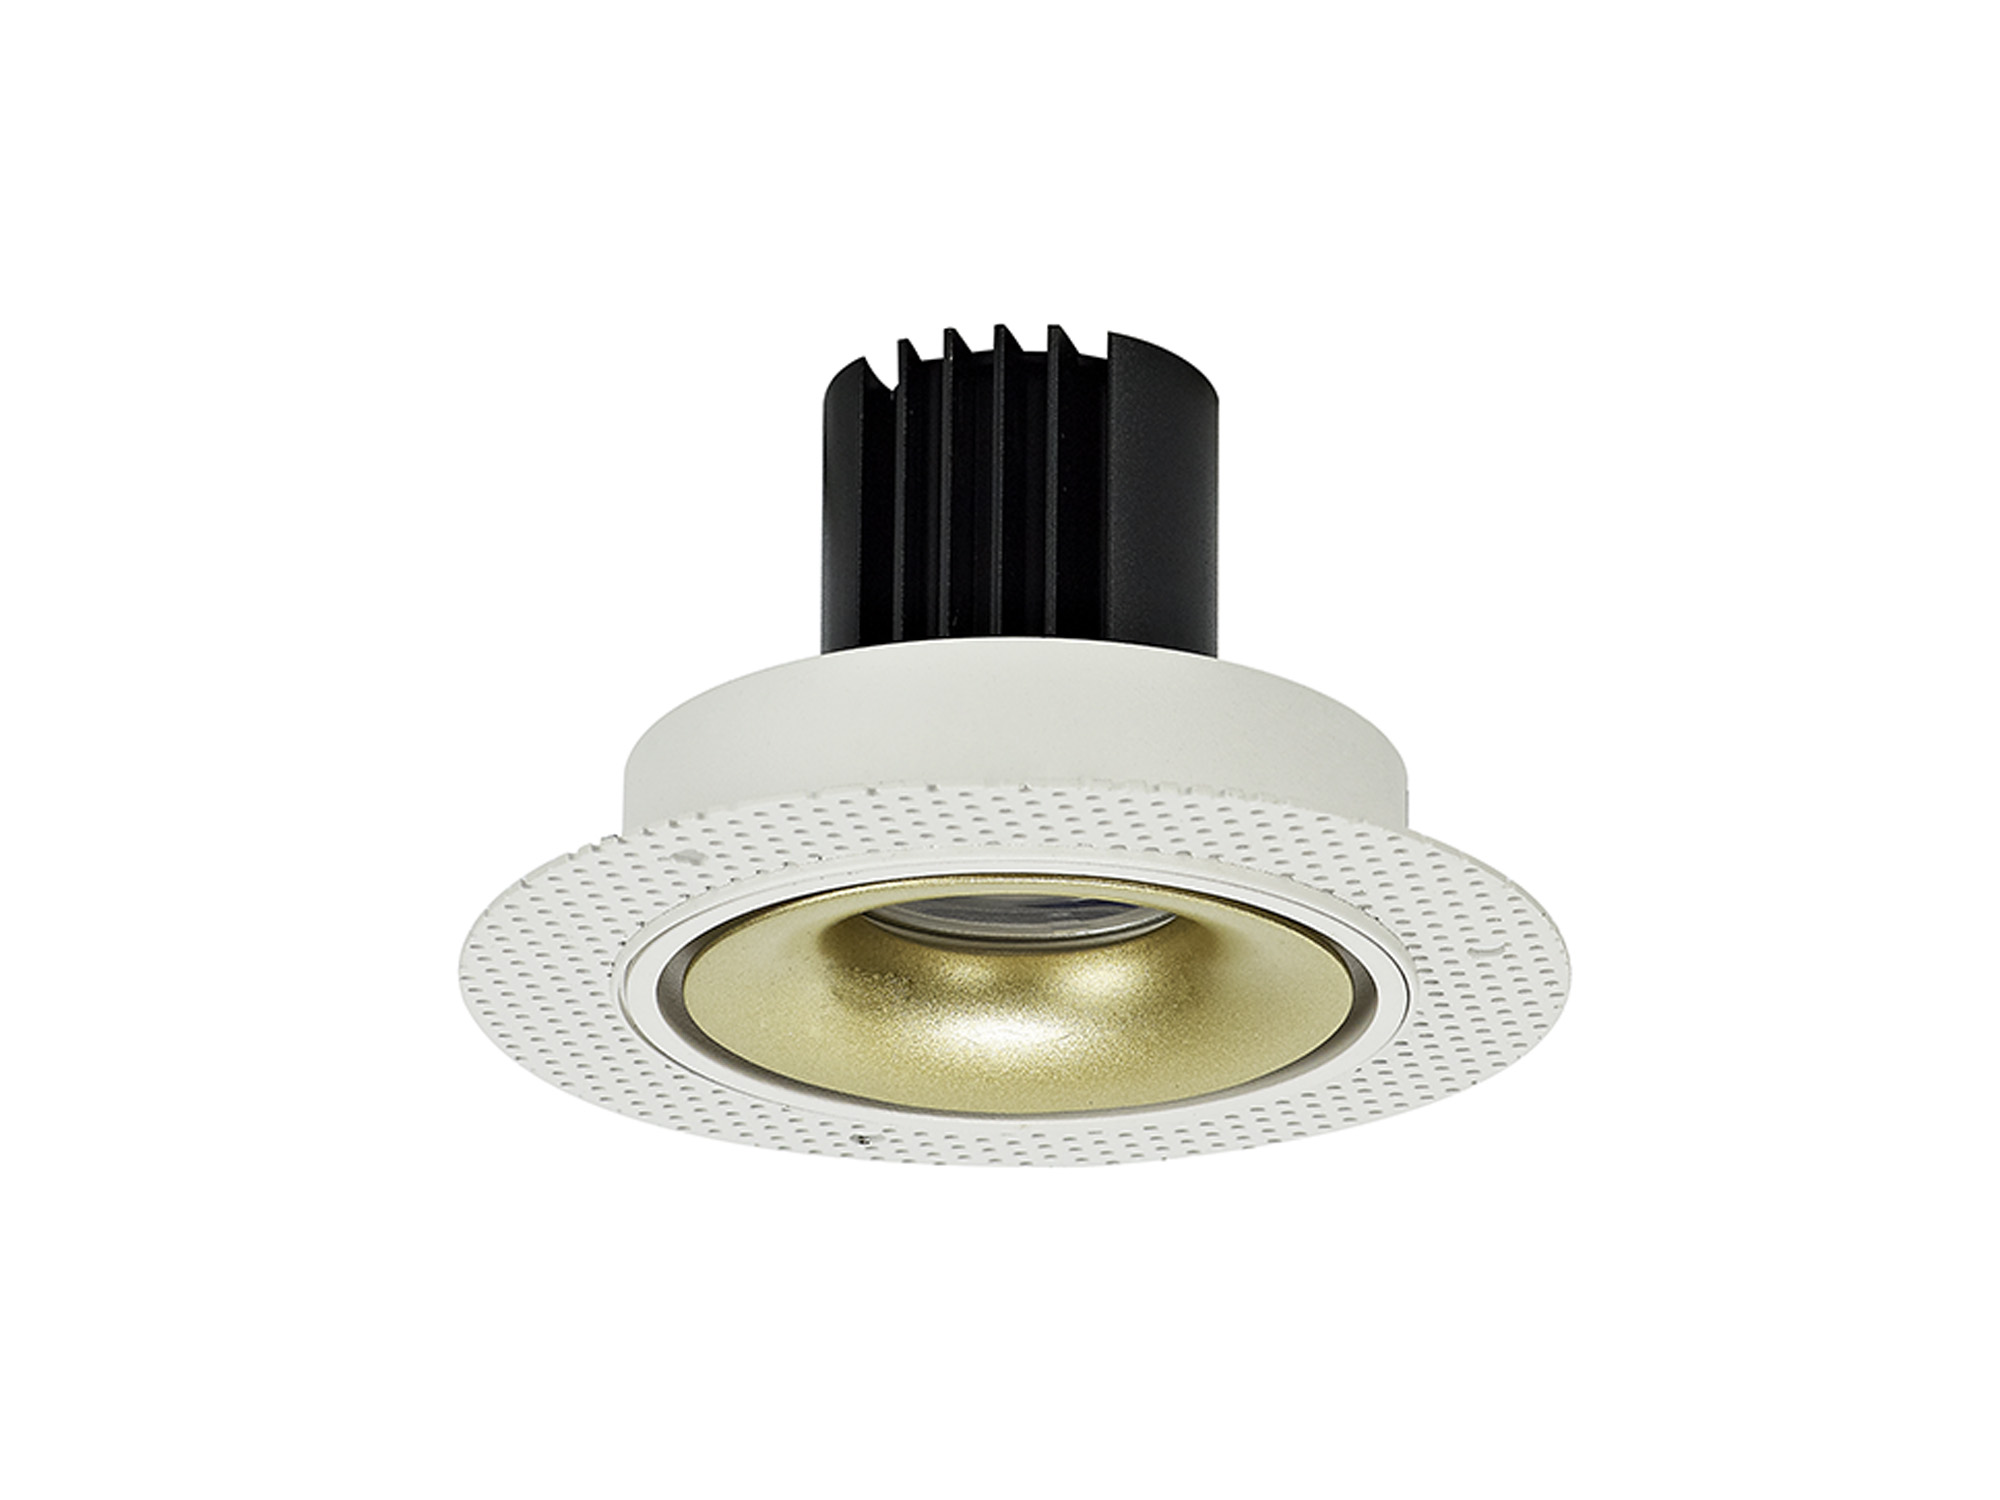 DM202078  Bolor T 9 Tridonic Powered 9W 2700K 770lm 24° CRI>90 LED Engine White/Gold Trimless Fixed Recessed Spotlight; IP20